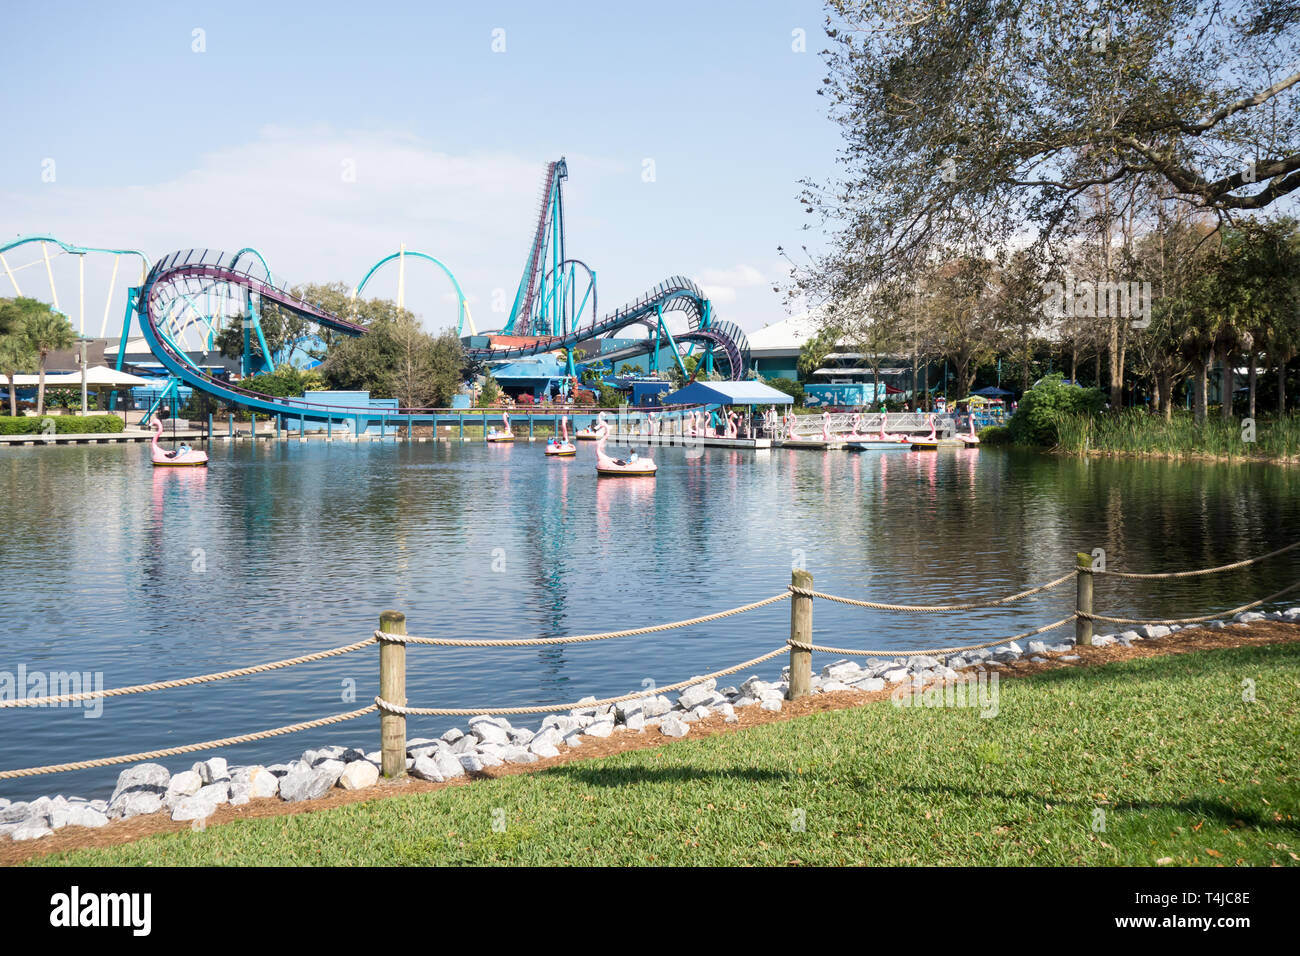 A Distance View of Flamingo Paddling Boats and Manta, the largest ride at Seaworld in Orlando. Stock Photo